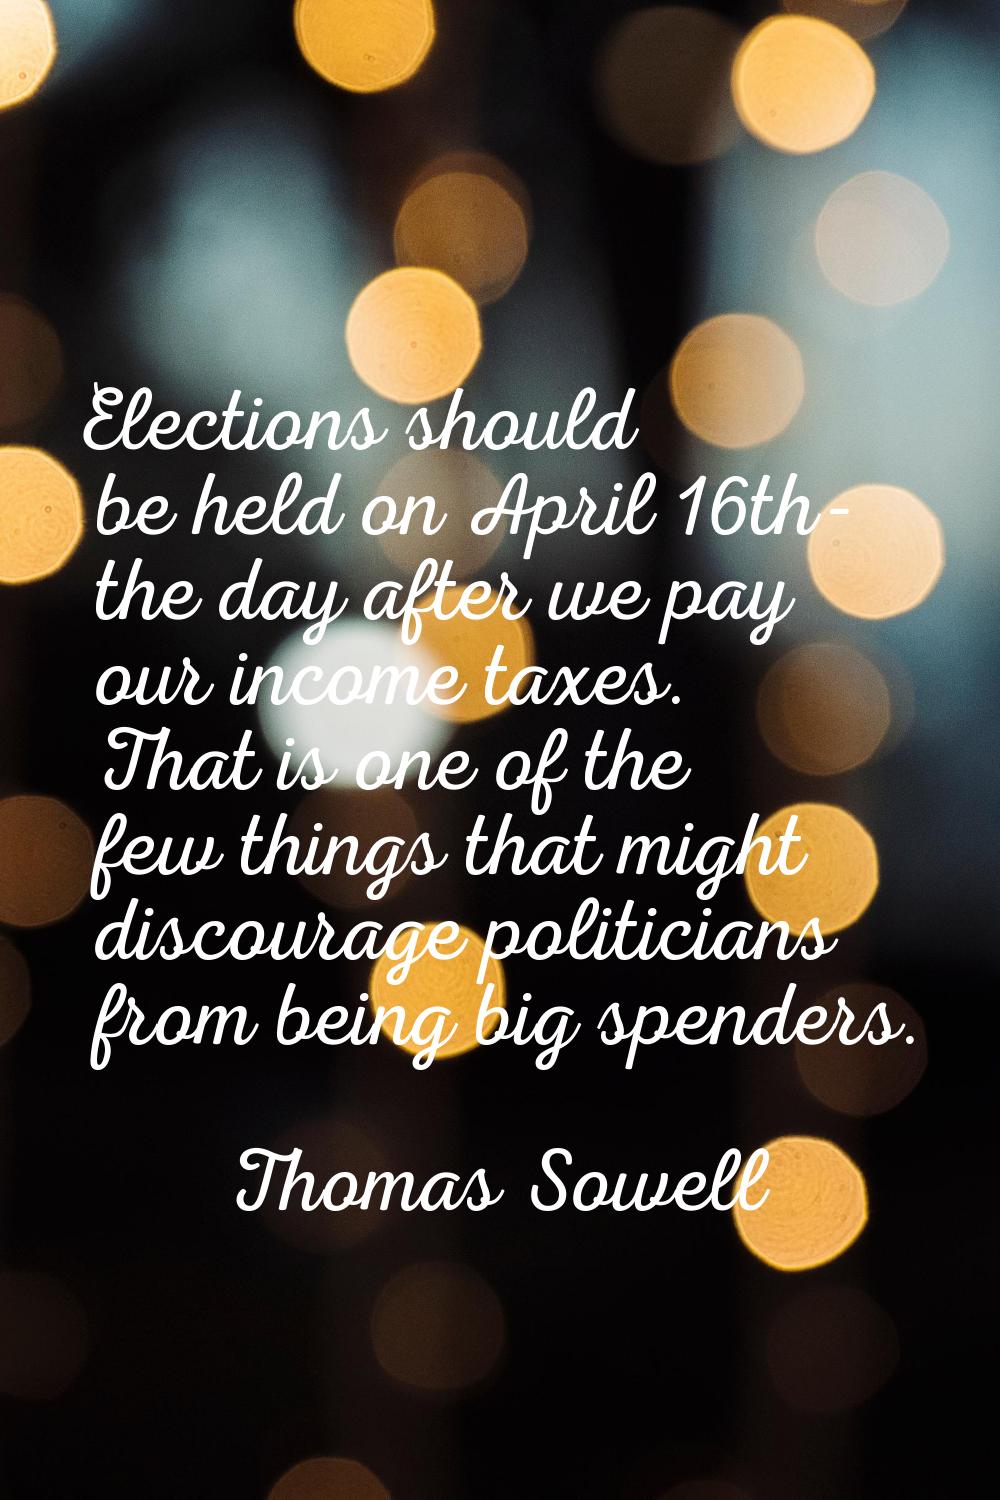 Elections should be held on April 16th- the day after we pay our income taxes. That is one of the f